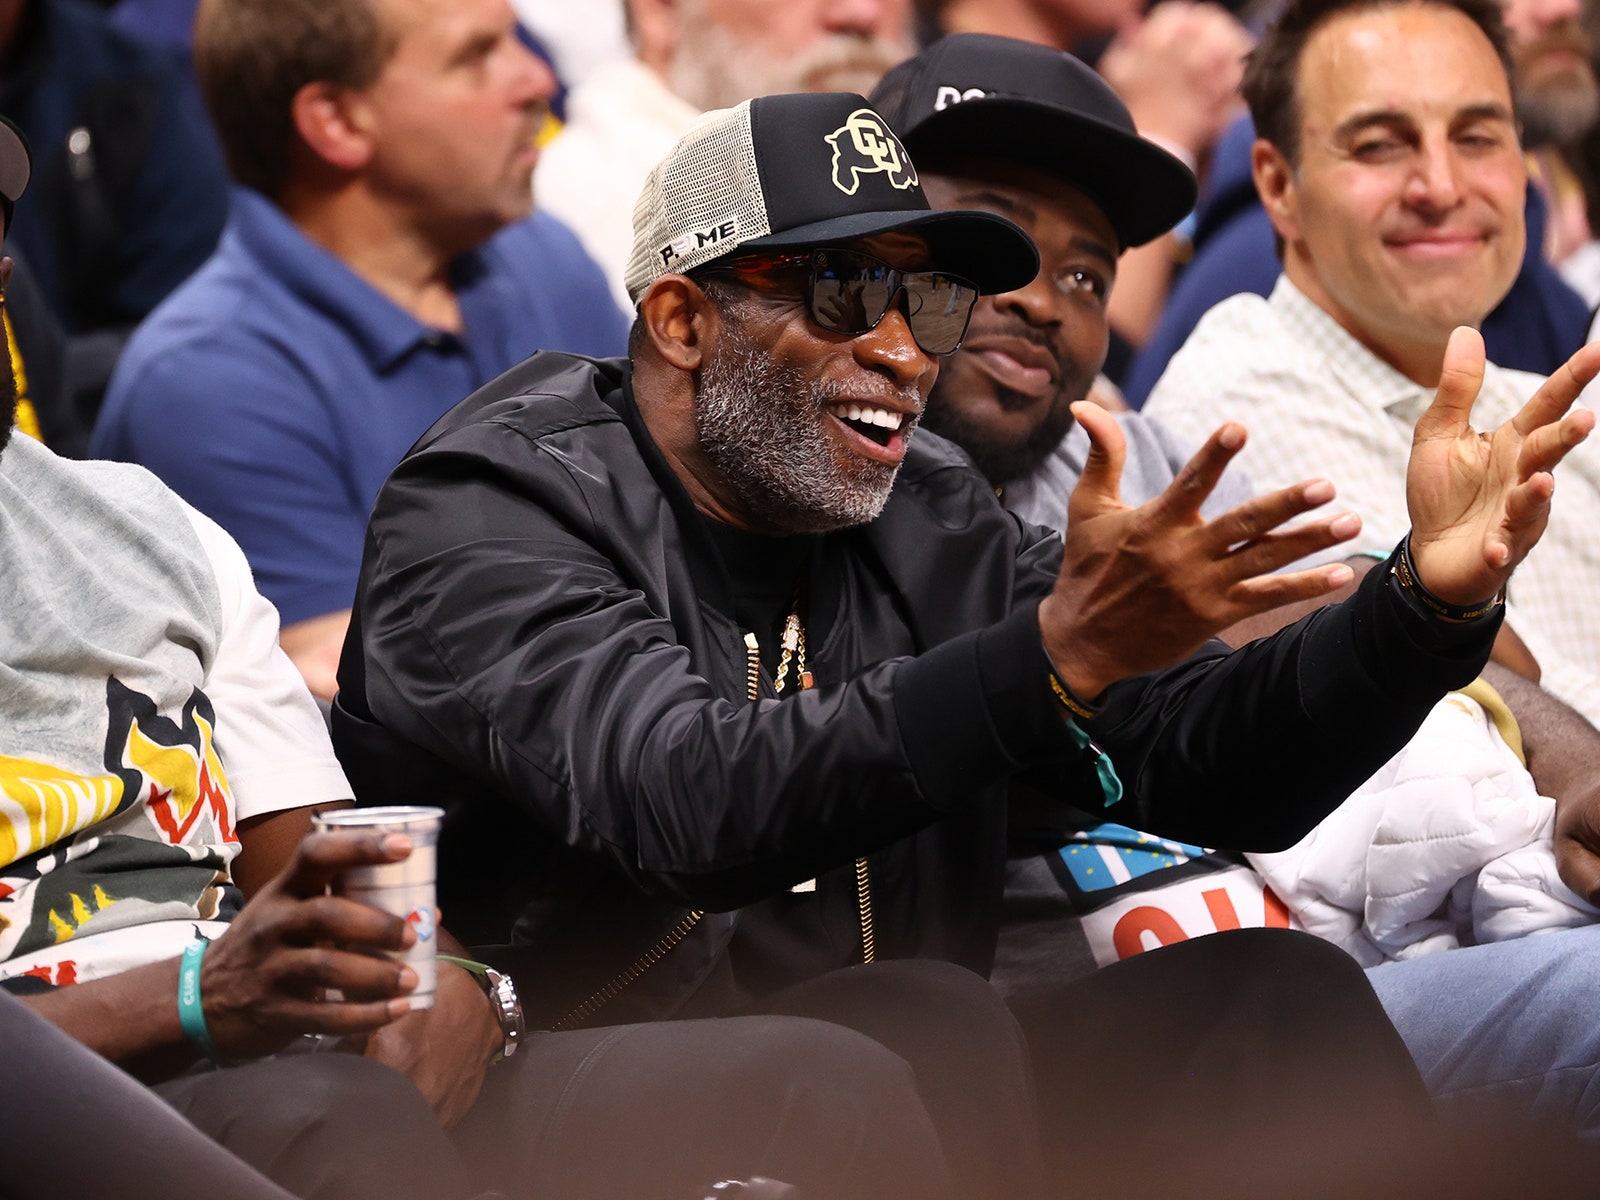 Deion Sanders’ Coolest Move Yet? Growing This Glorious Gray Beard